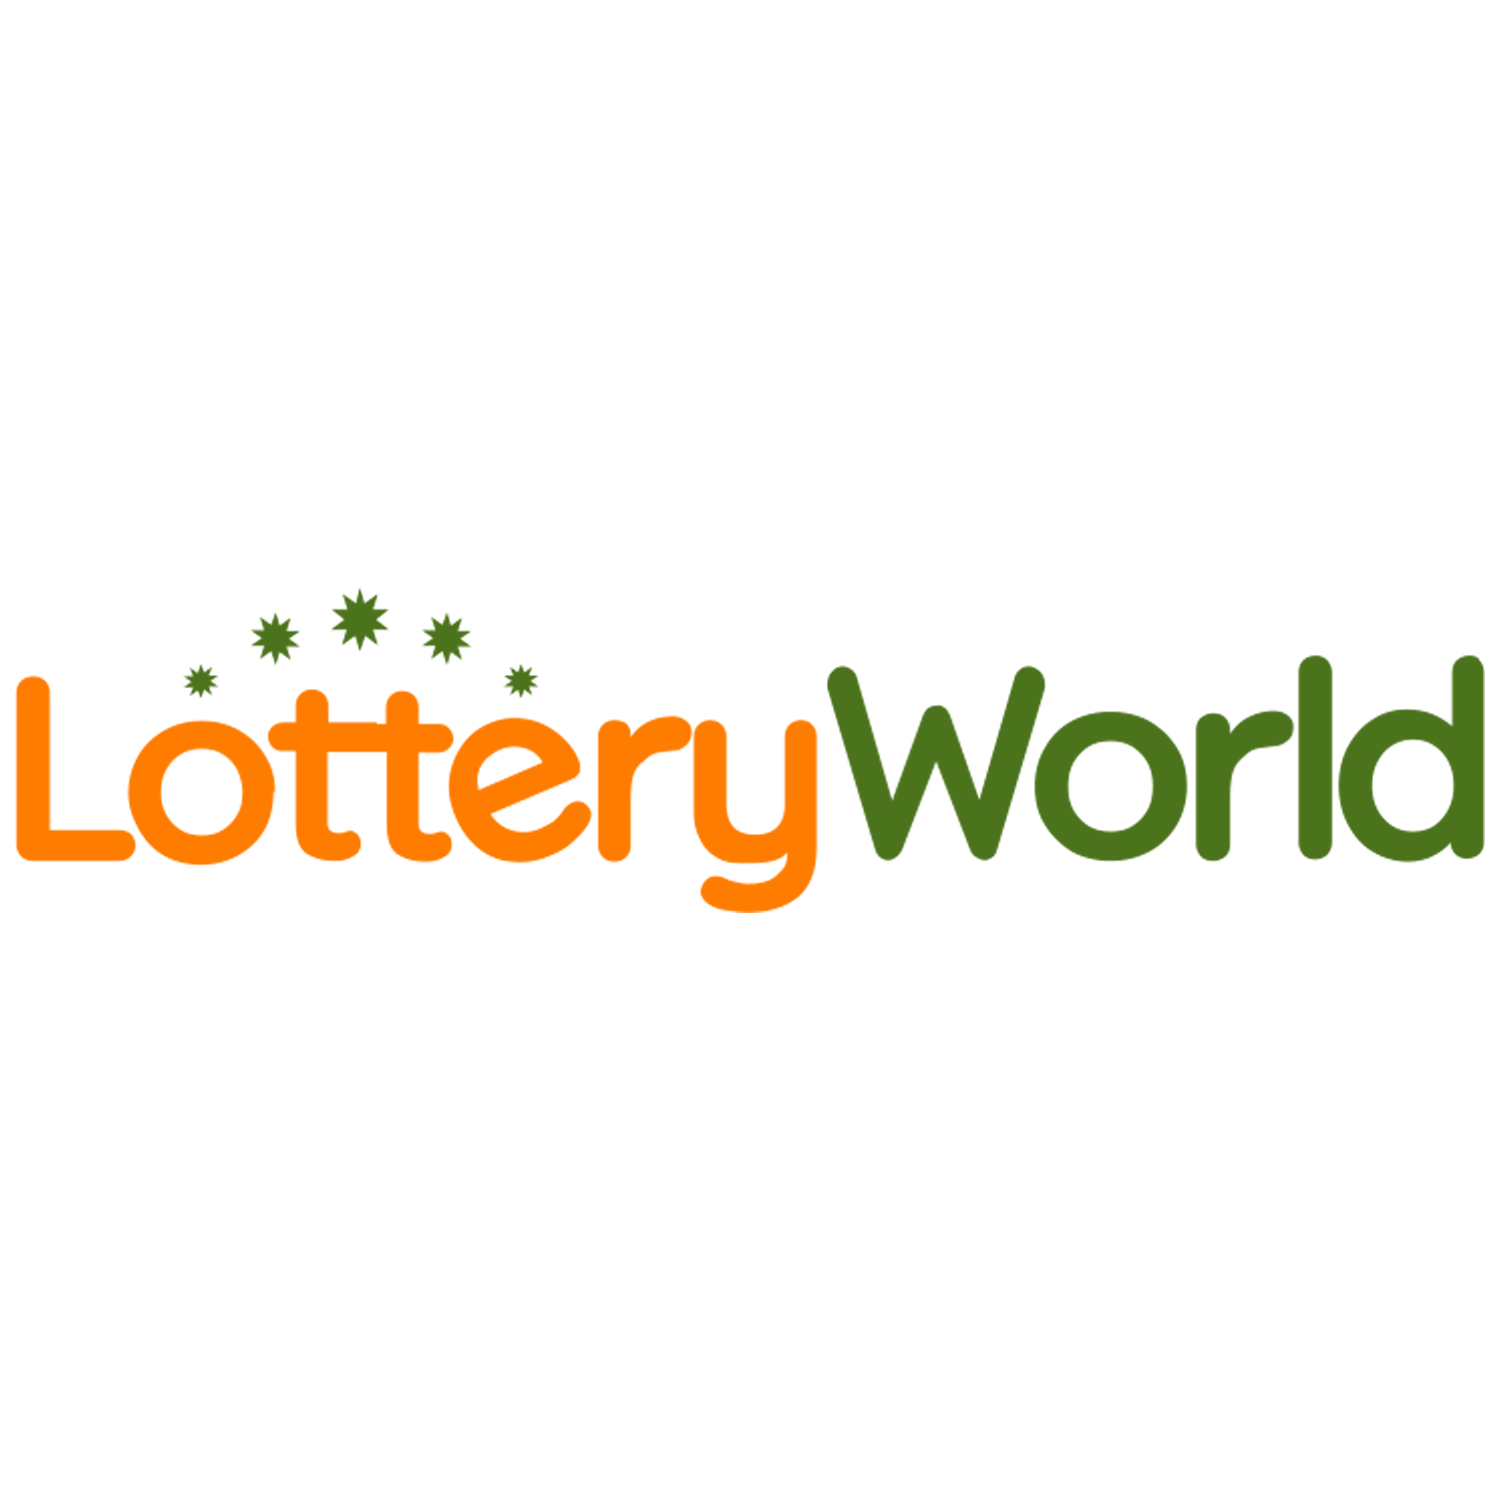 LotteryWorld offers tickets for many online lotteries.